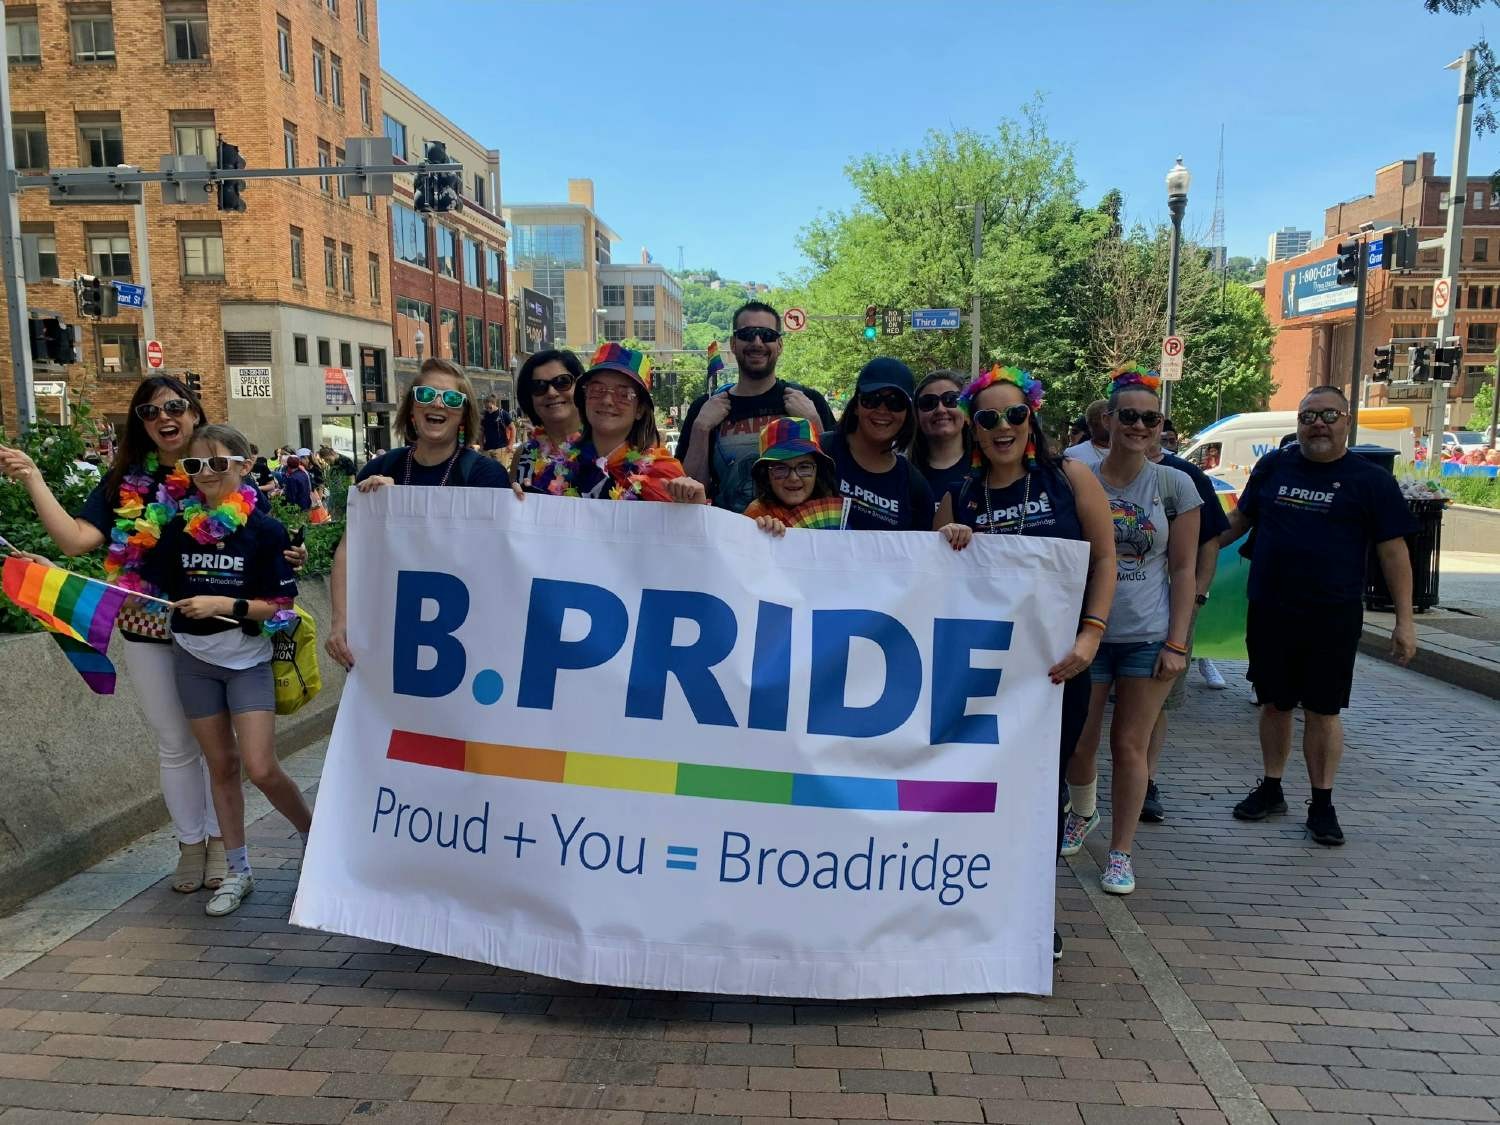 Associates from our Pittsburgh, PA office representing the Broadridge B.Pride ERG in the Pittsburgh Pride parade